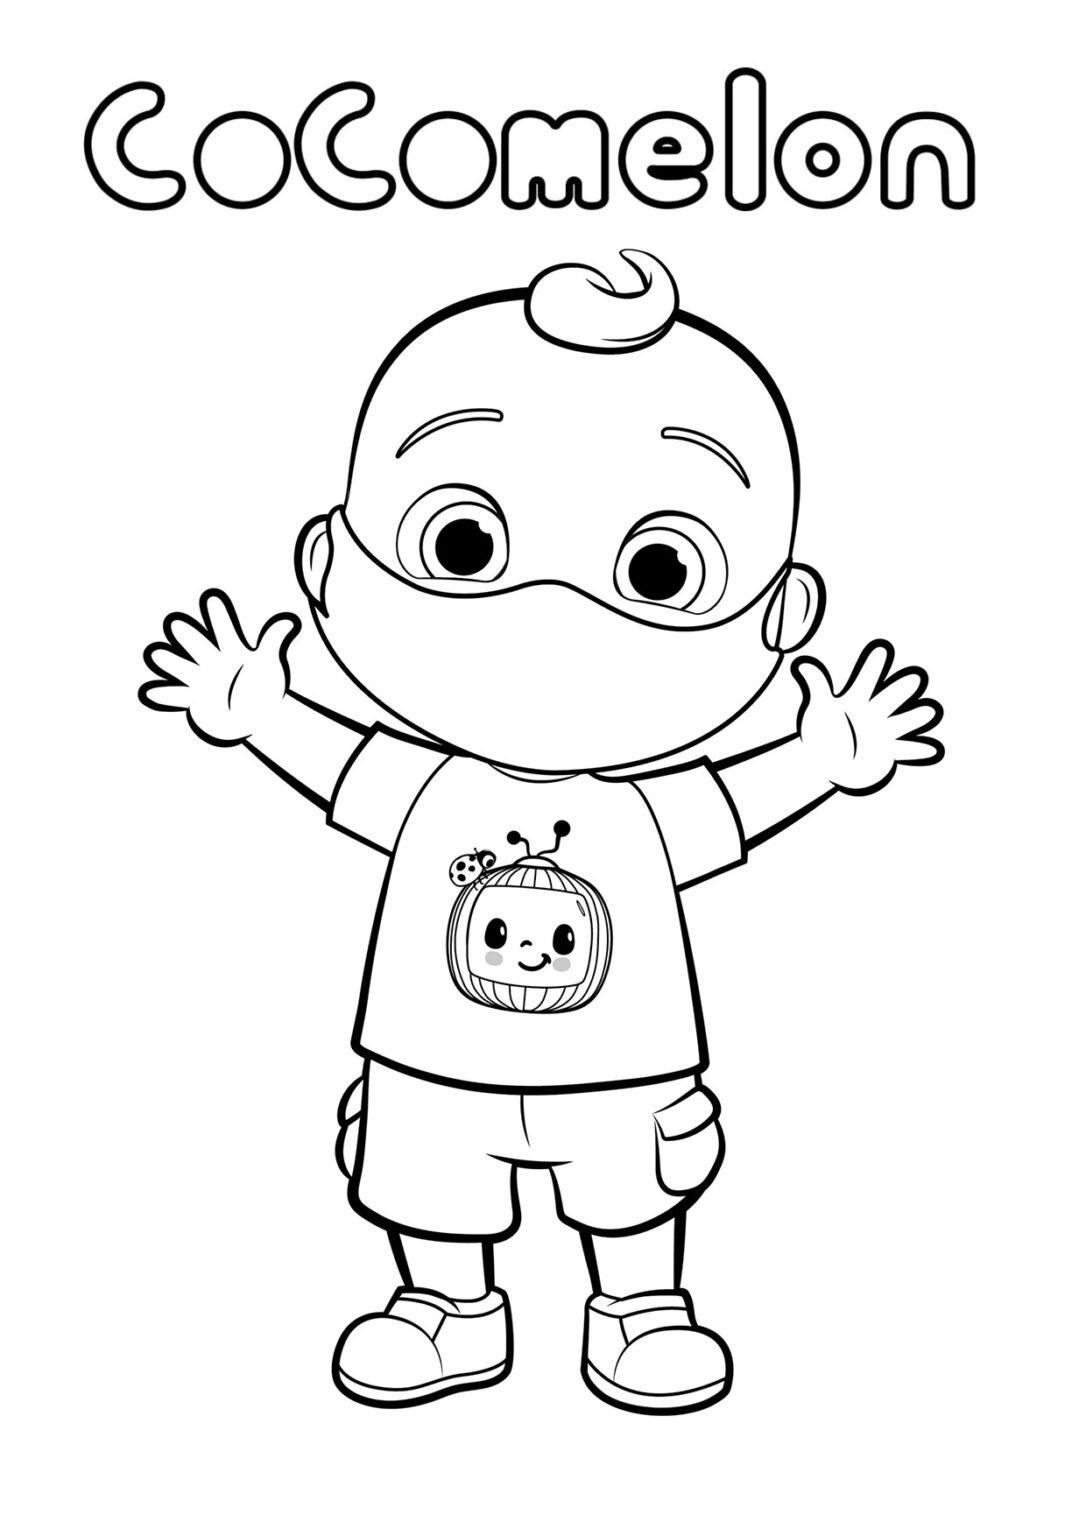 cocomelon jj with a mask coloring page